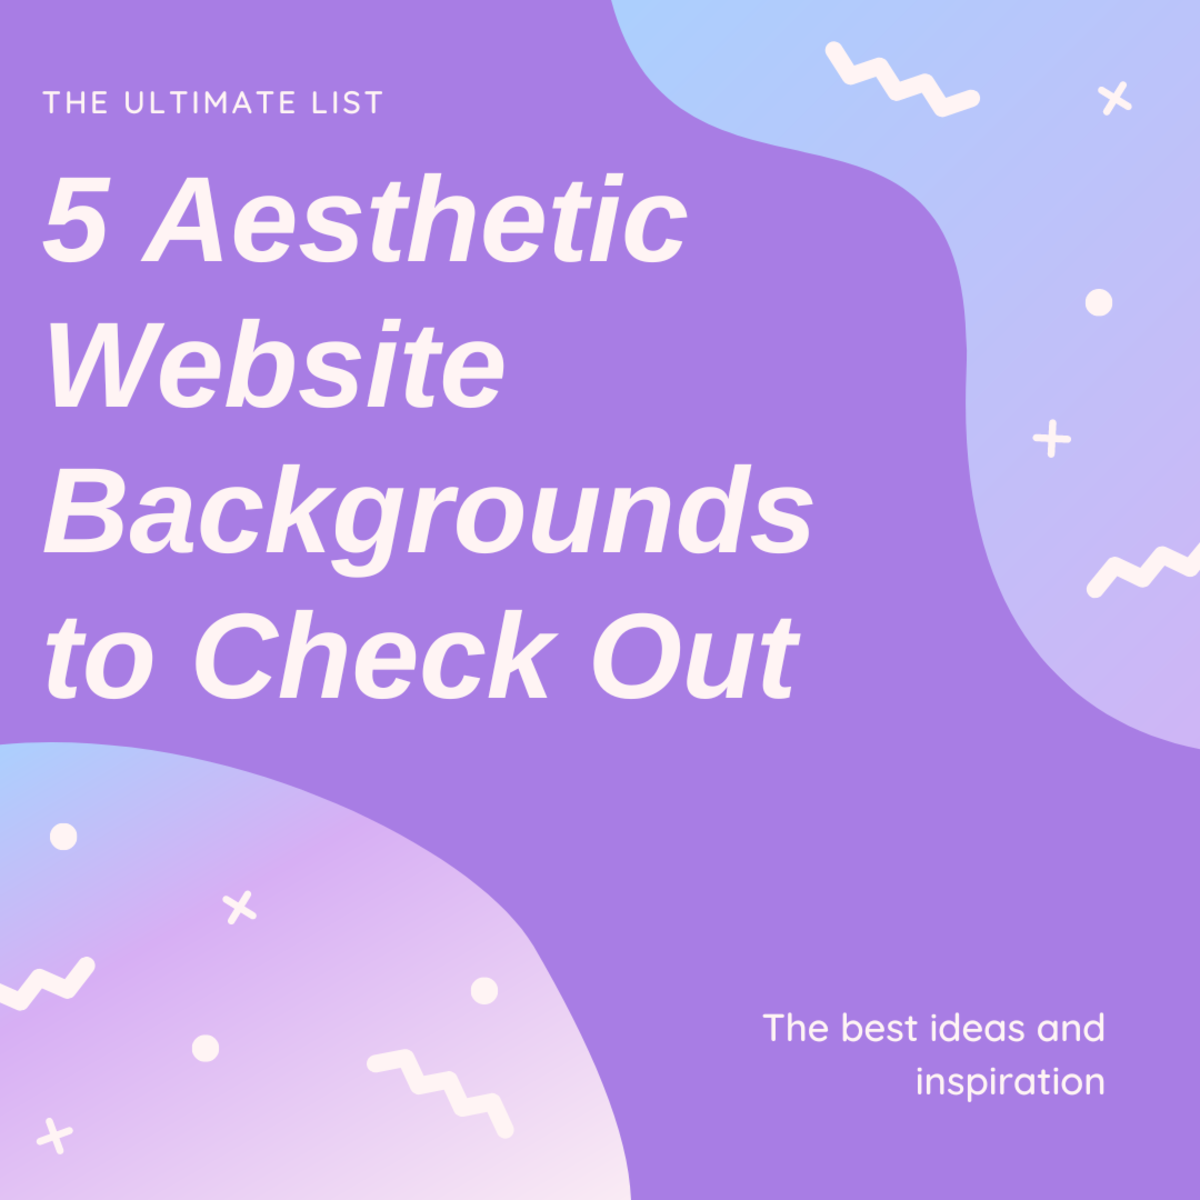 5 Best Aesthetic Website Backgrounds to Check Out  The Ultimate List - 67